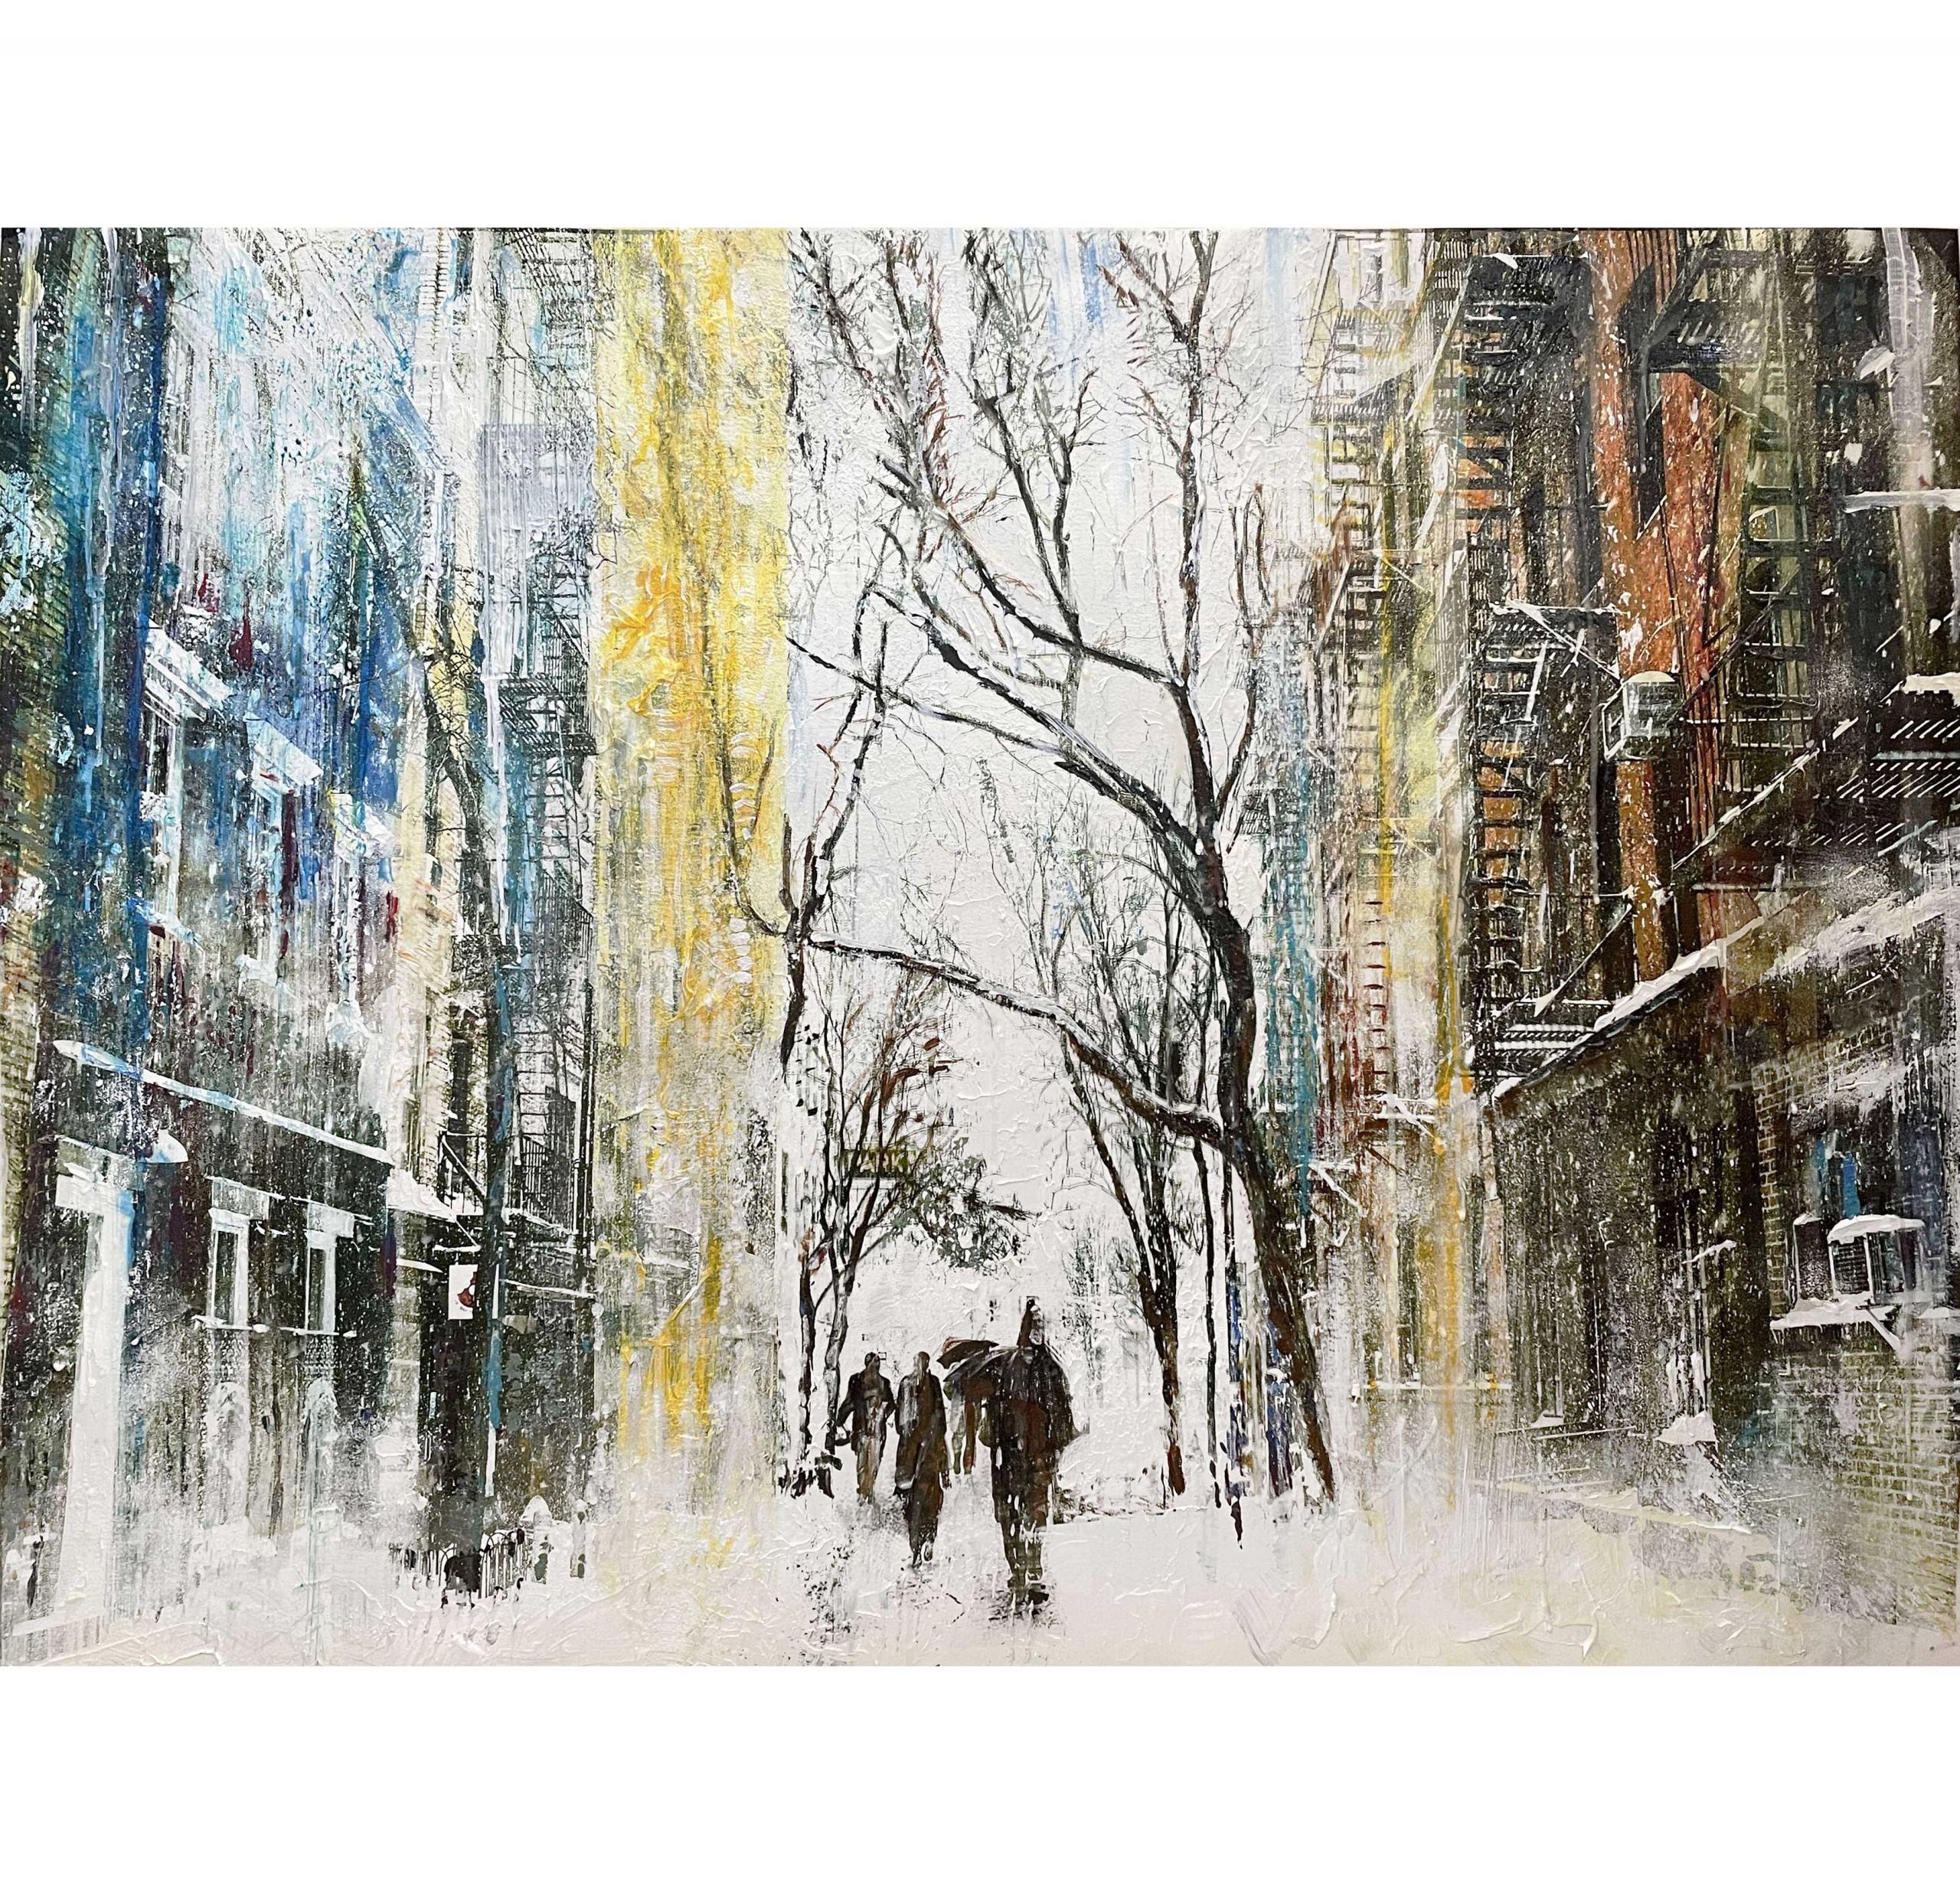 Gill Storr Landscape Painting - Snowy New York, Original Cityscape Painting, New York Statement Art, Mixed media